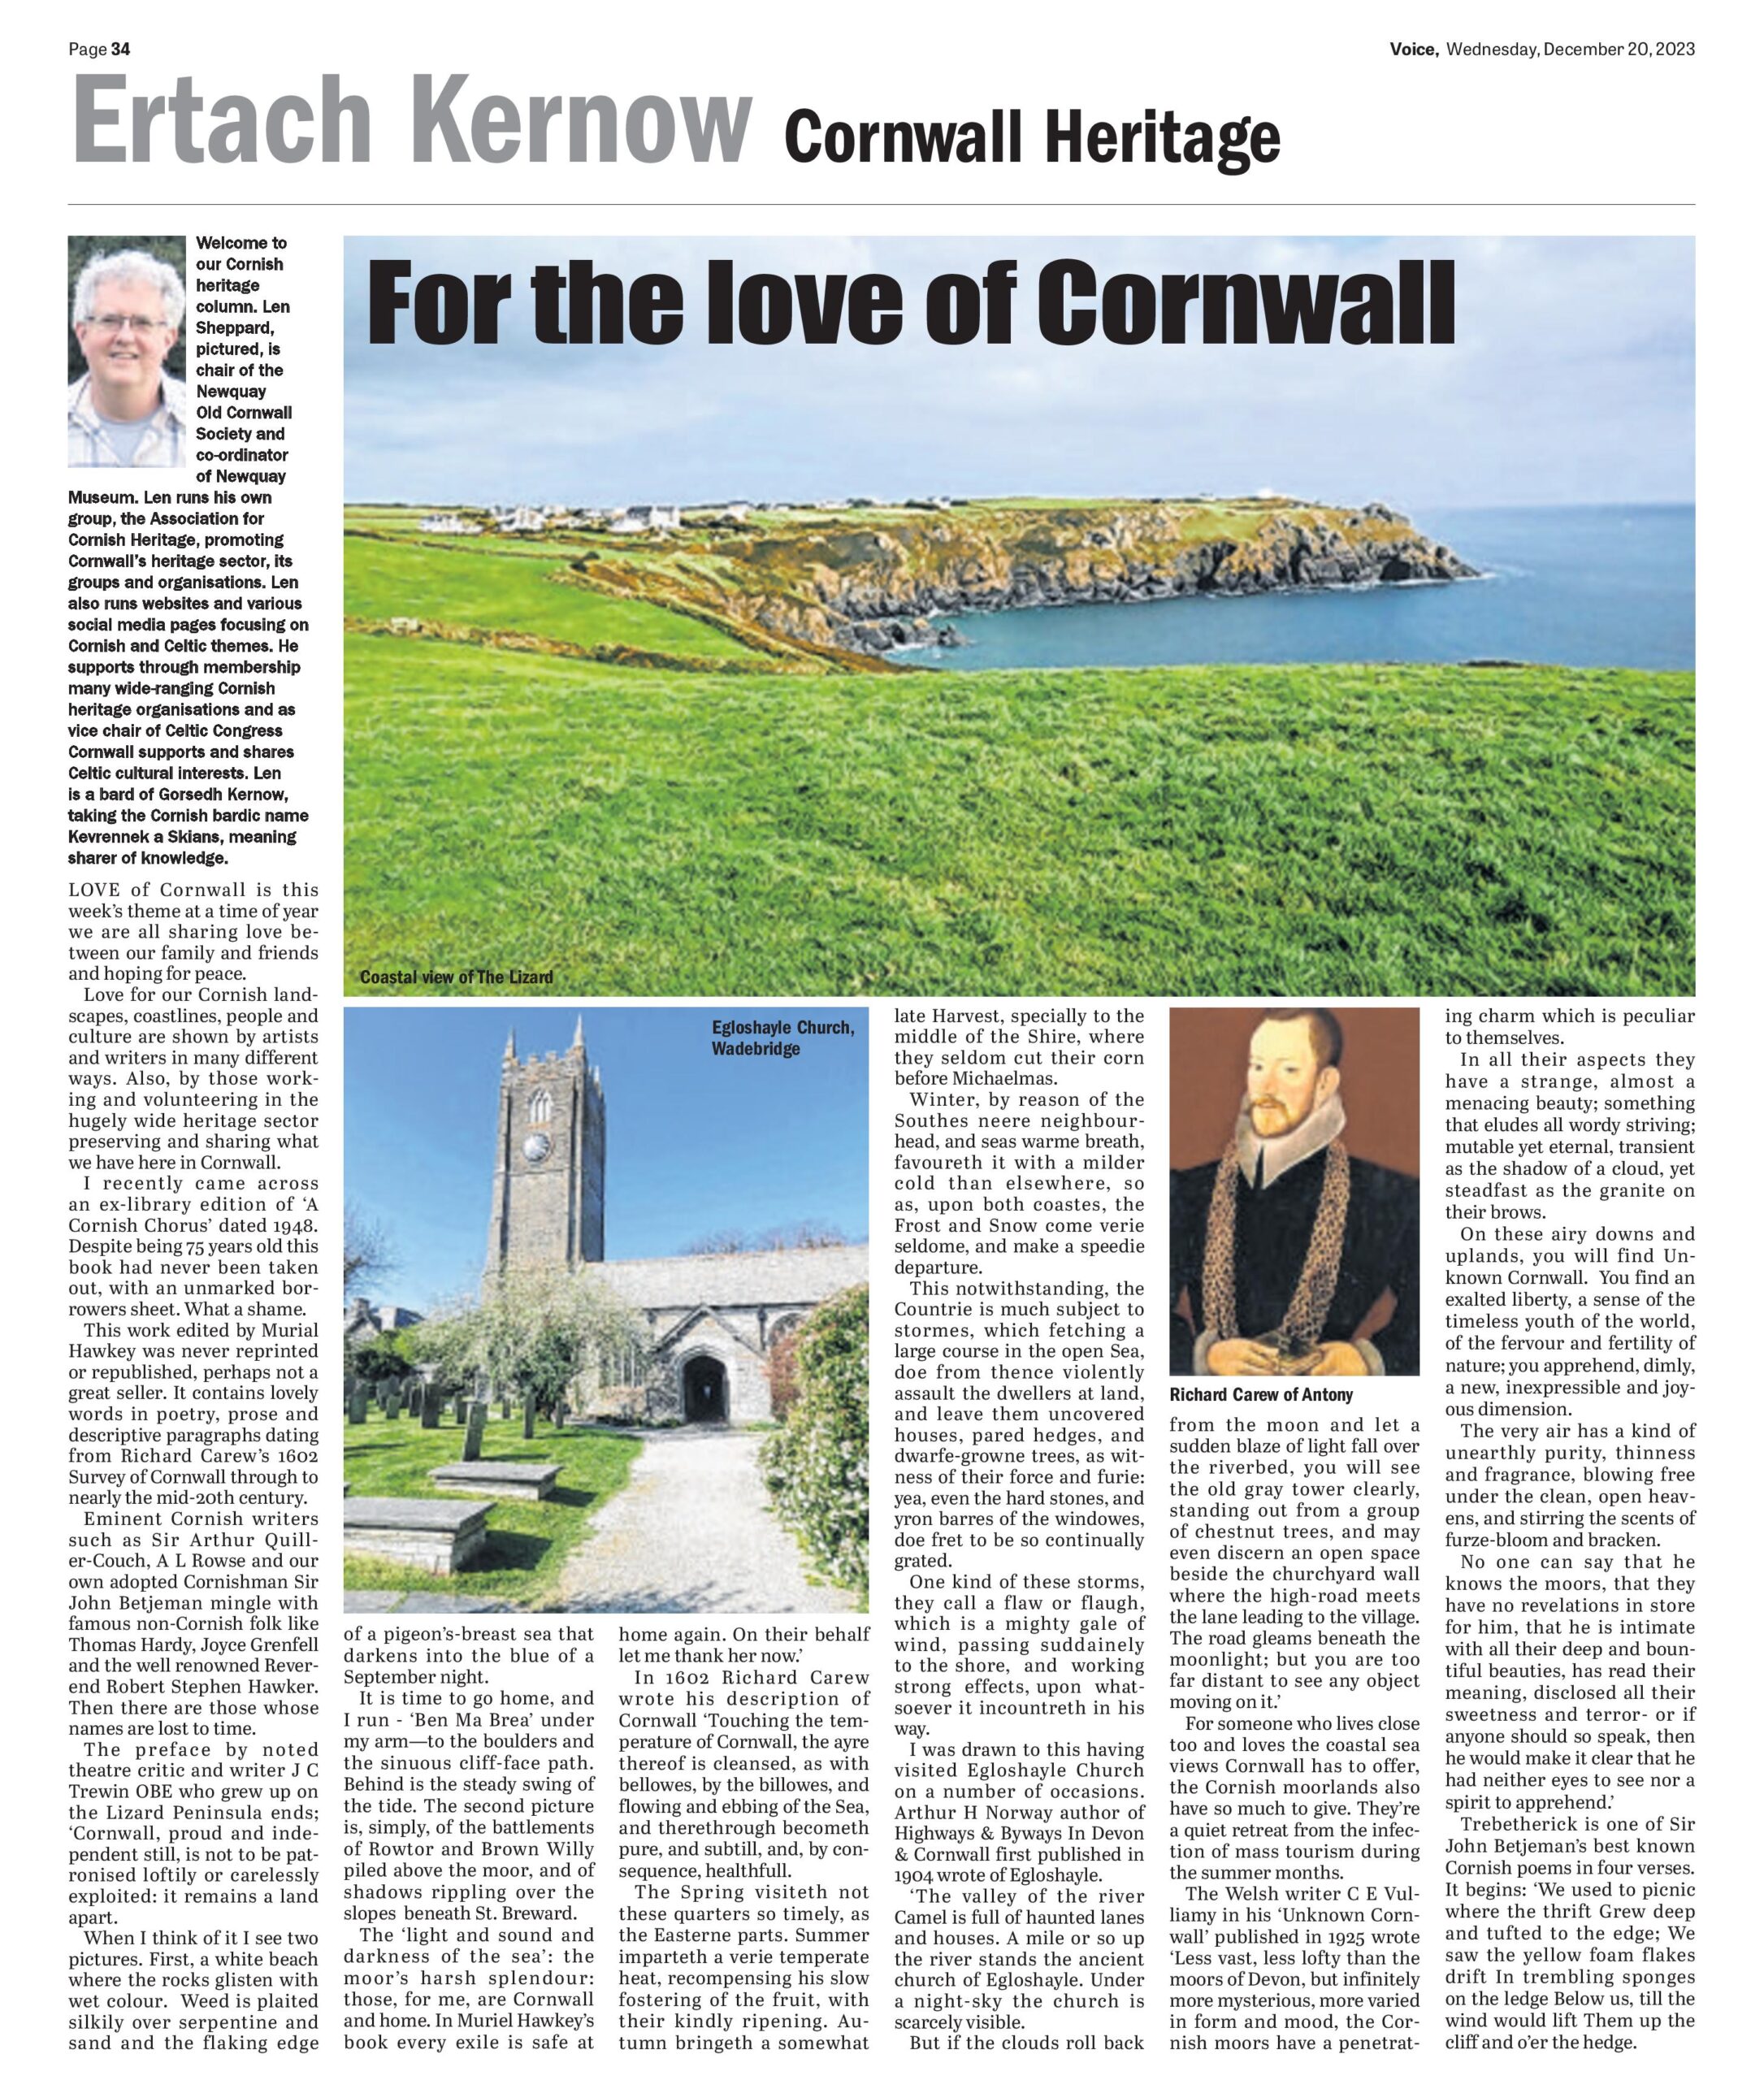 For the love of Cornwall